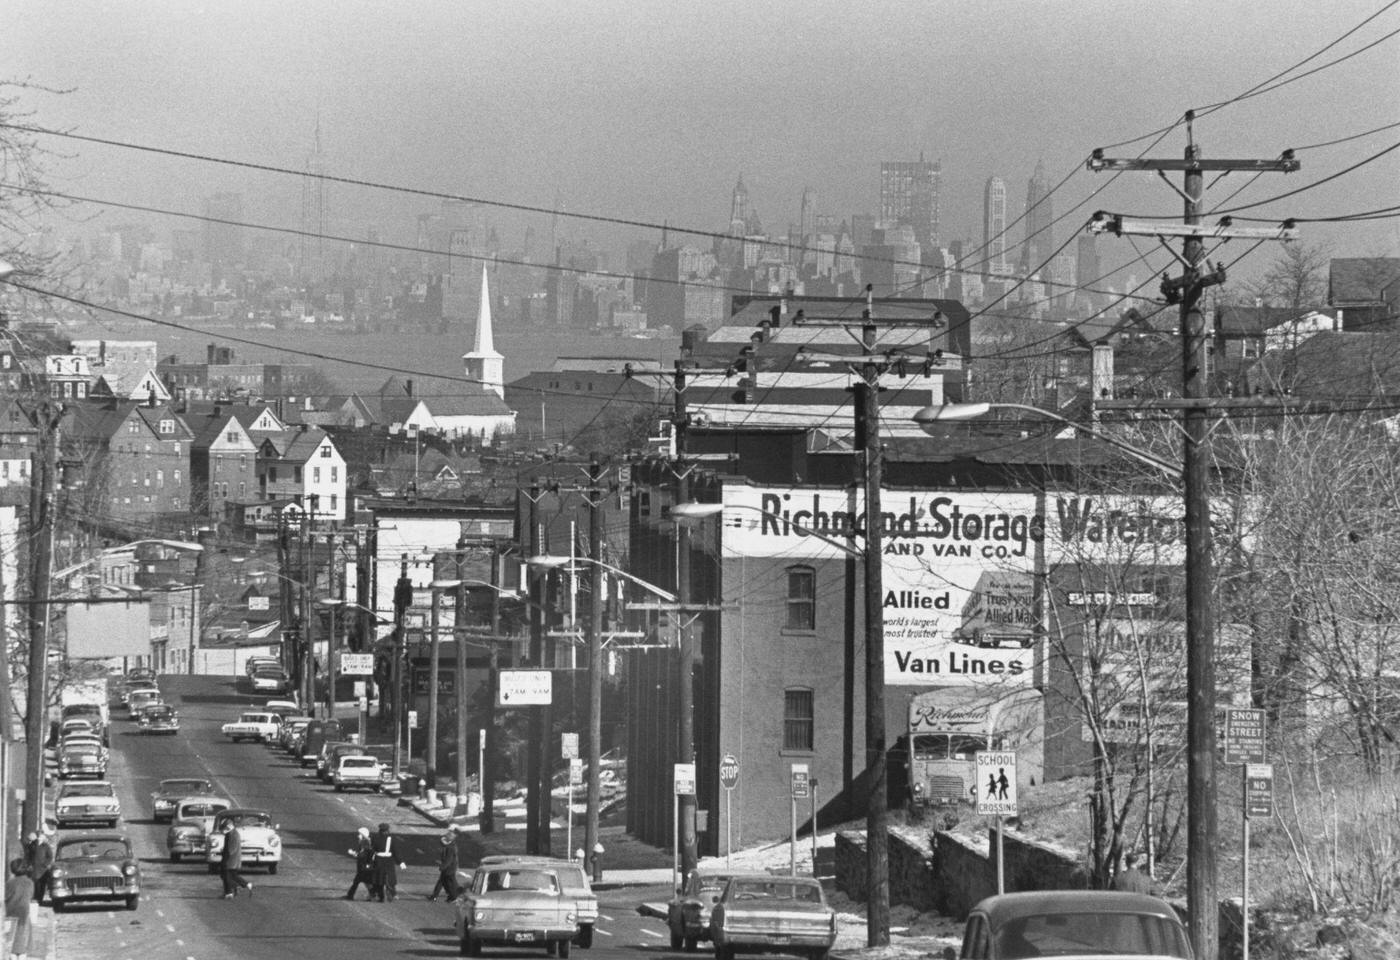 Traffic And Overhead Cables In St. George Neighborhood, Staten Island, 1954.